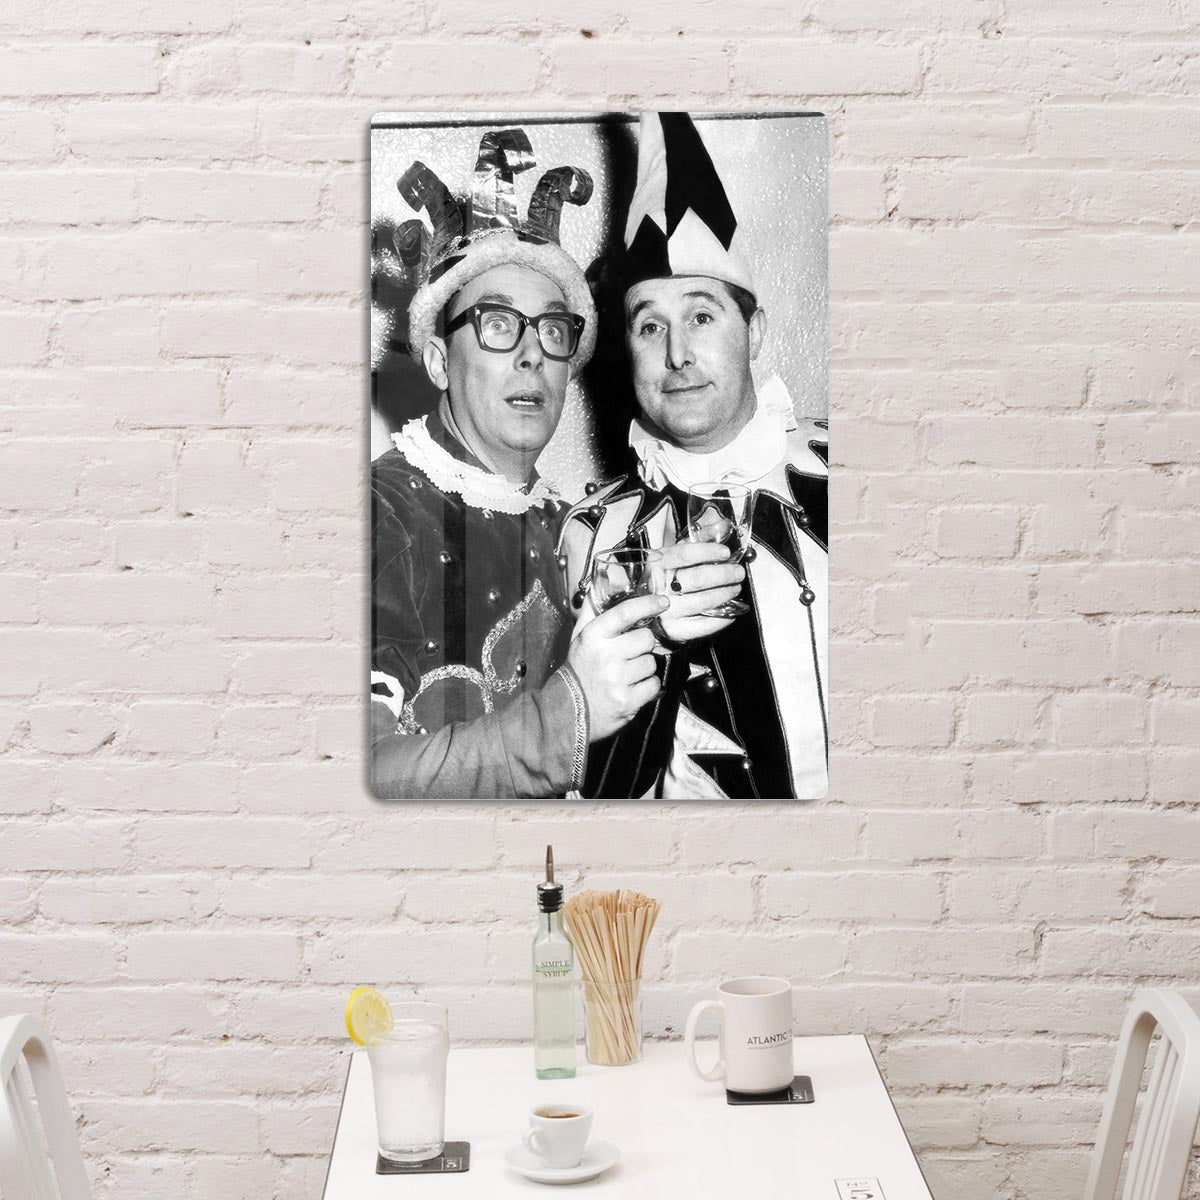 Morecambe and Wise dressed as court jesters HD Metal Print